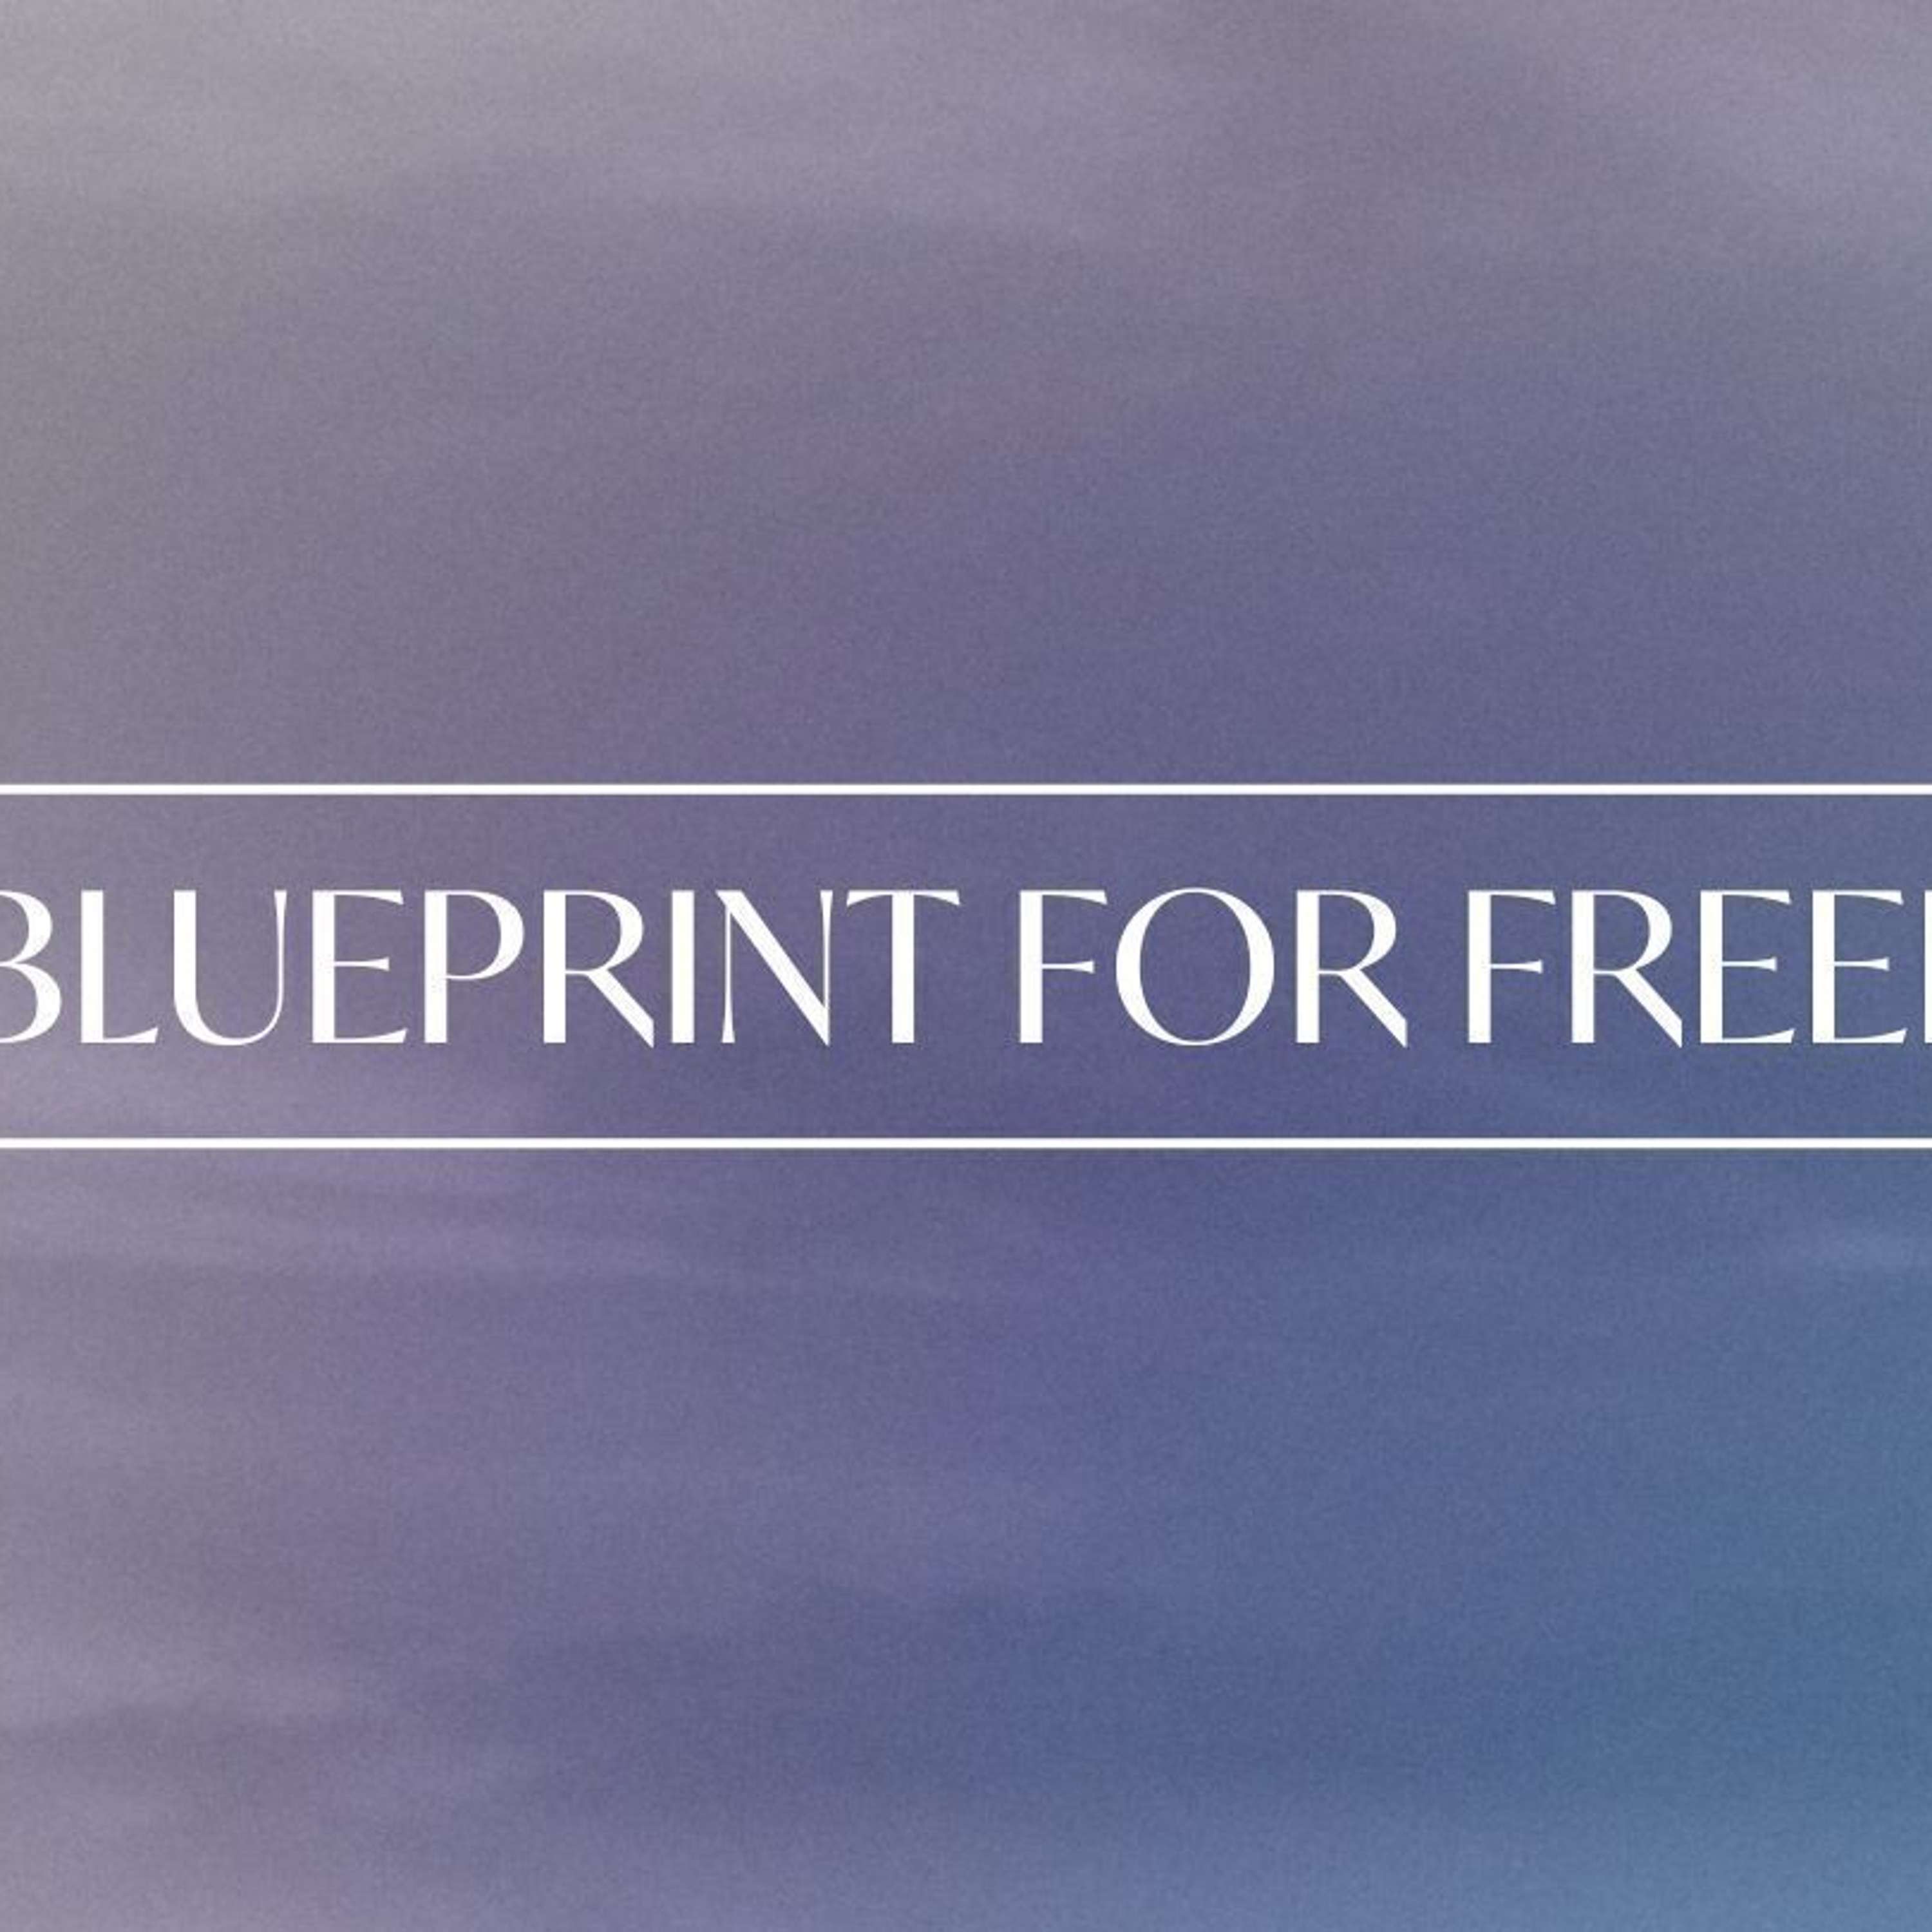 The Blueprint for Freedom: The Problem Jesus Came to Solve